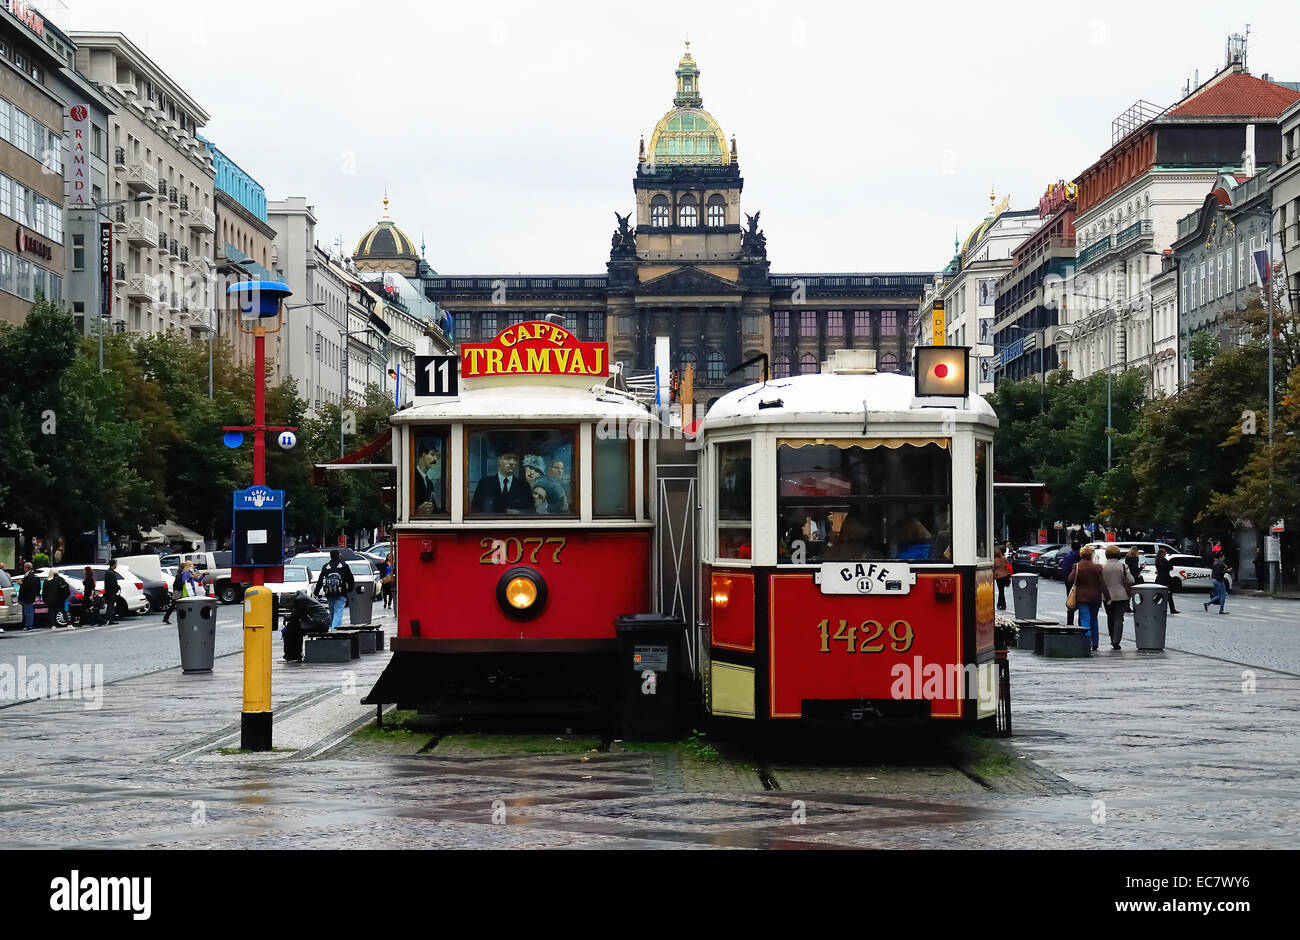 Czech Republic, Prague. The Cafe Tramvaj. The café is located in St. Wenceslas Square in two old trams. Stock Photo